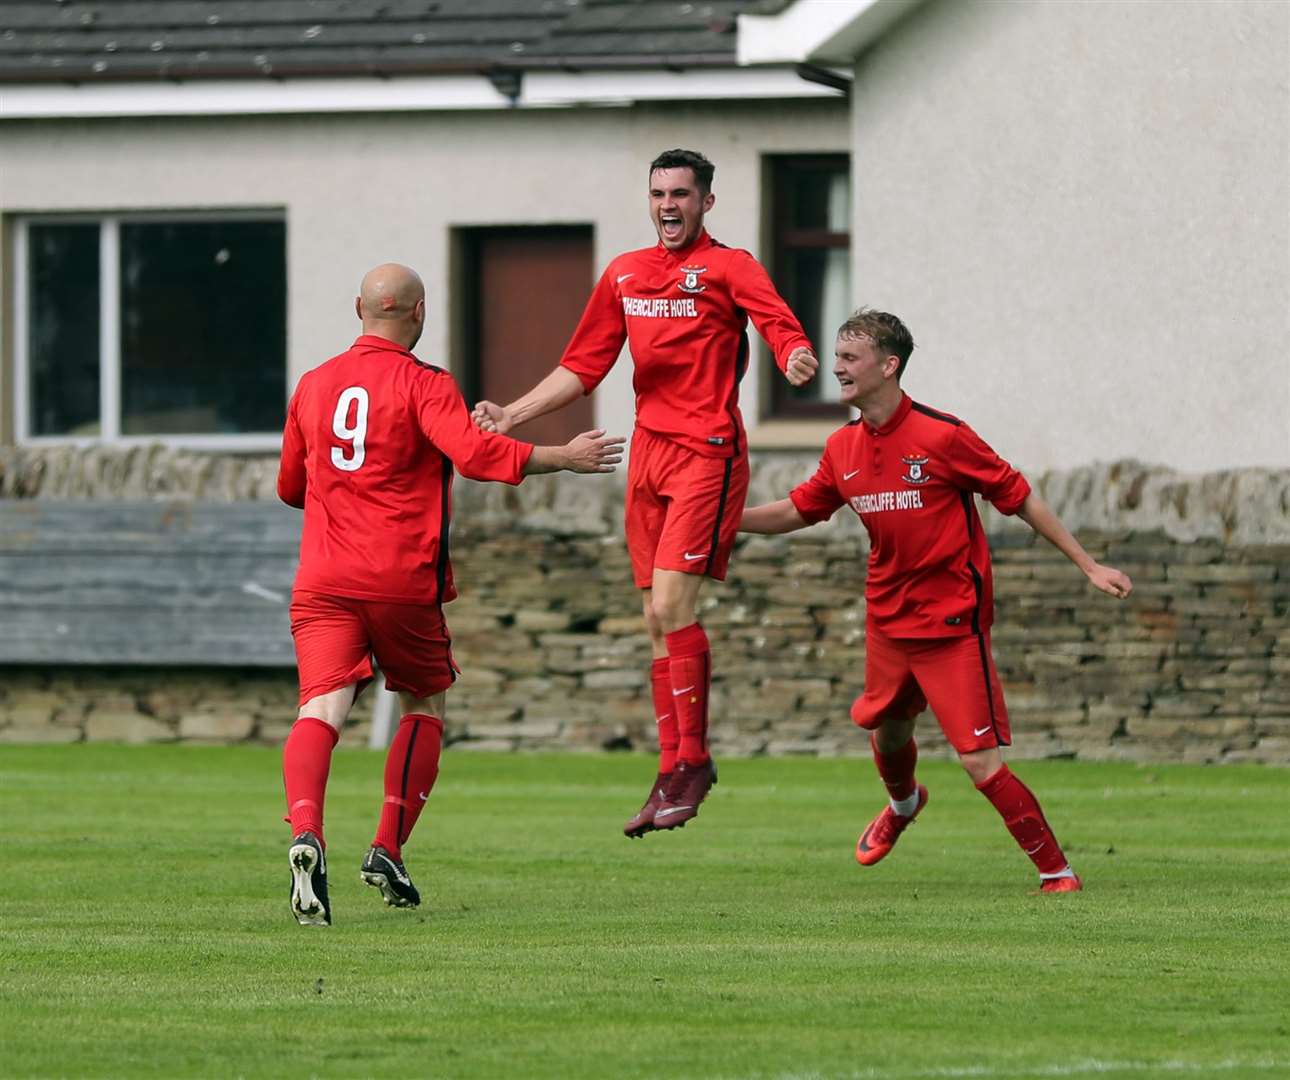 Wick Groats' Ben Sinclair jumps in celebration after scoring their second goal against Pentland United. Sandy Sutherland [number nine] and Mark Macadie rush to congratulate him. Picture: James Gunn